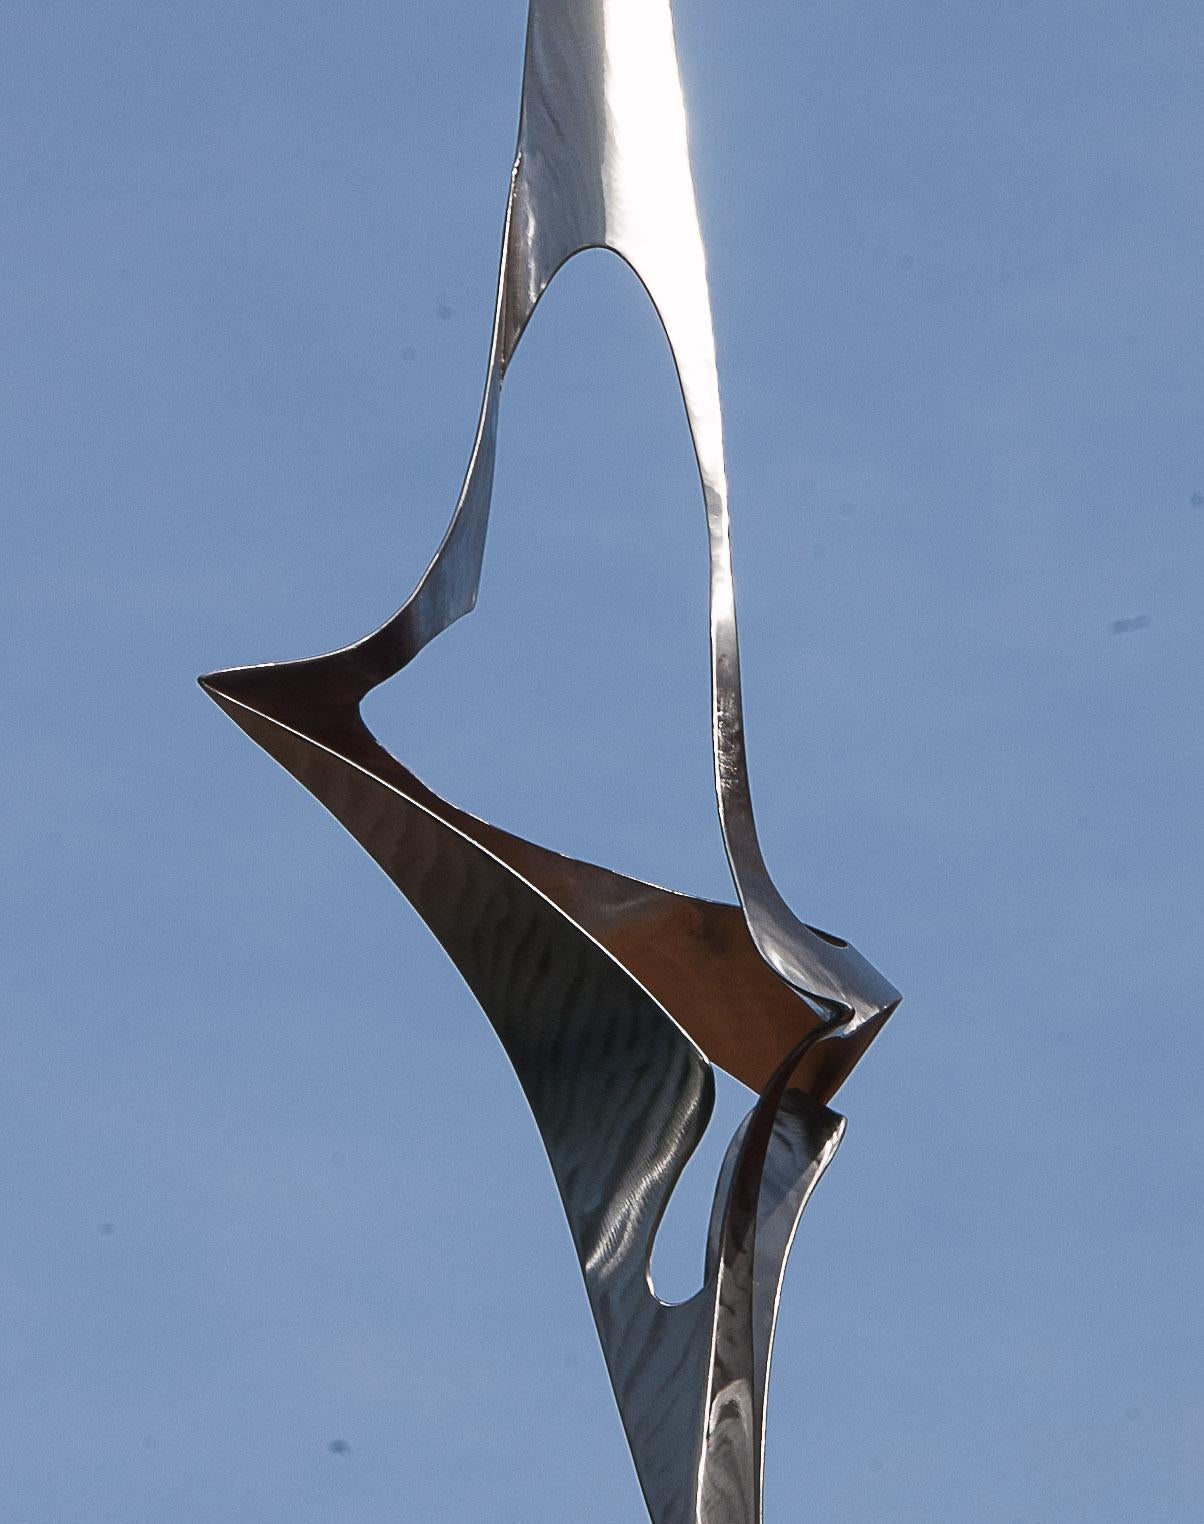 This sculpture is made with 316L stainless steel by Lutfi Romhein.  A 2 mm-thick stainless steel sheet was cut, folded, welded at some joint points, with a polished and sanded finishing.  The sculpture is welded to its base of 25 cm(width) x